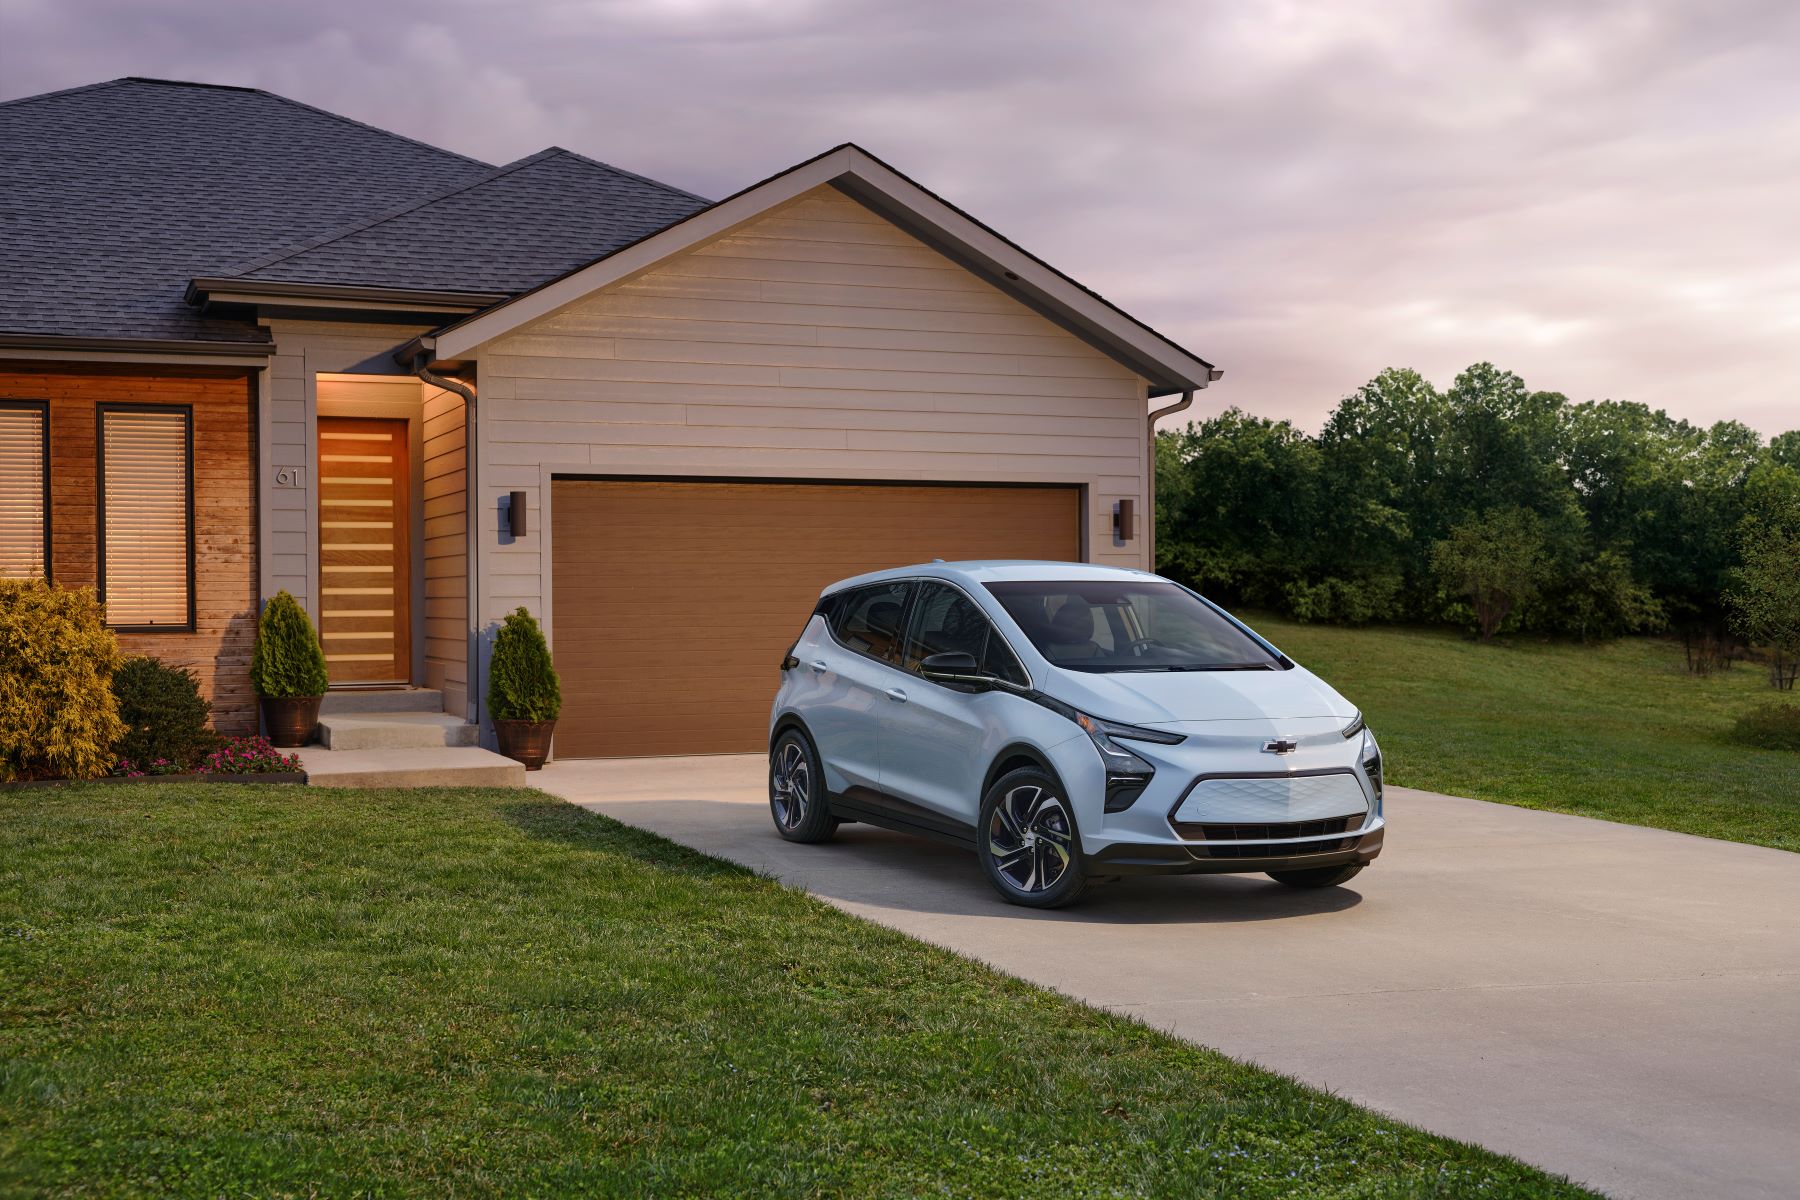 A light blue 2023 Chevy Bolt EV parked outside a home's garage near a cleaning cut grass lawn